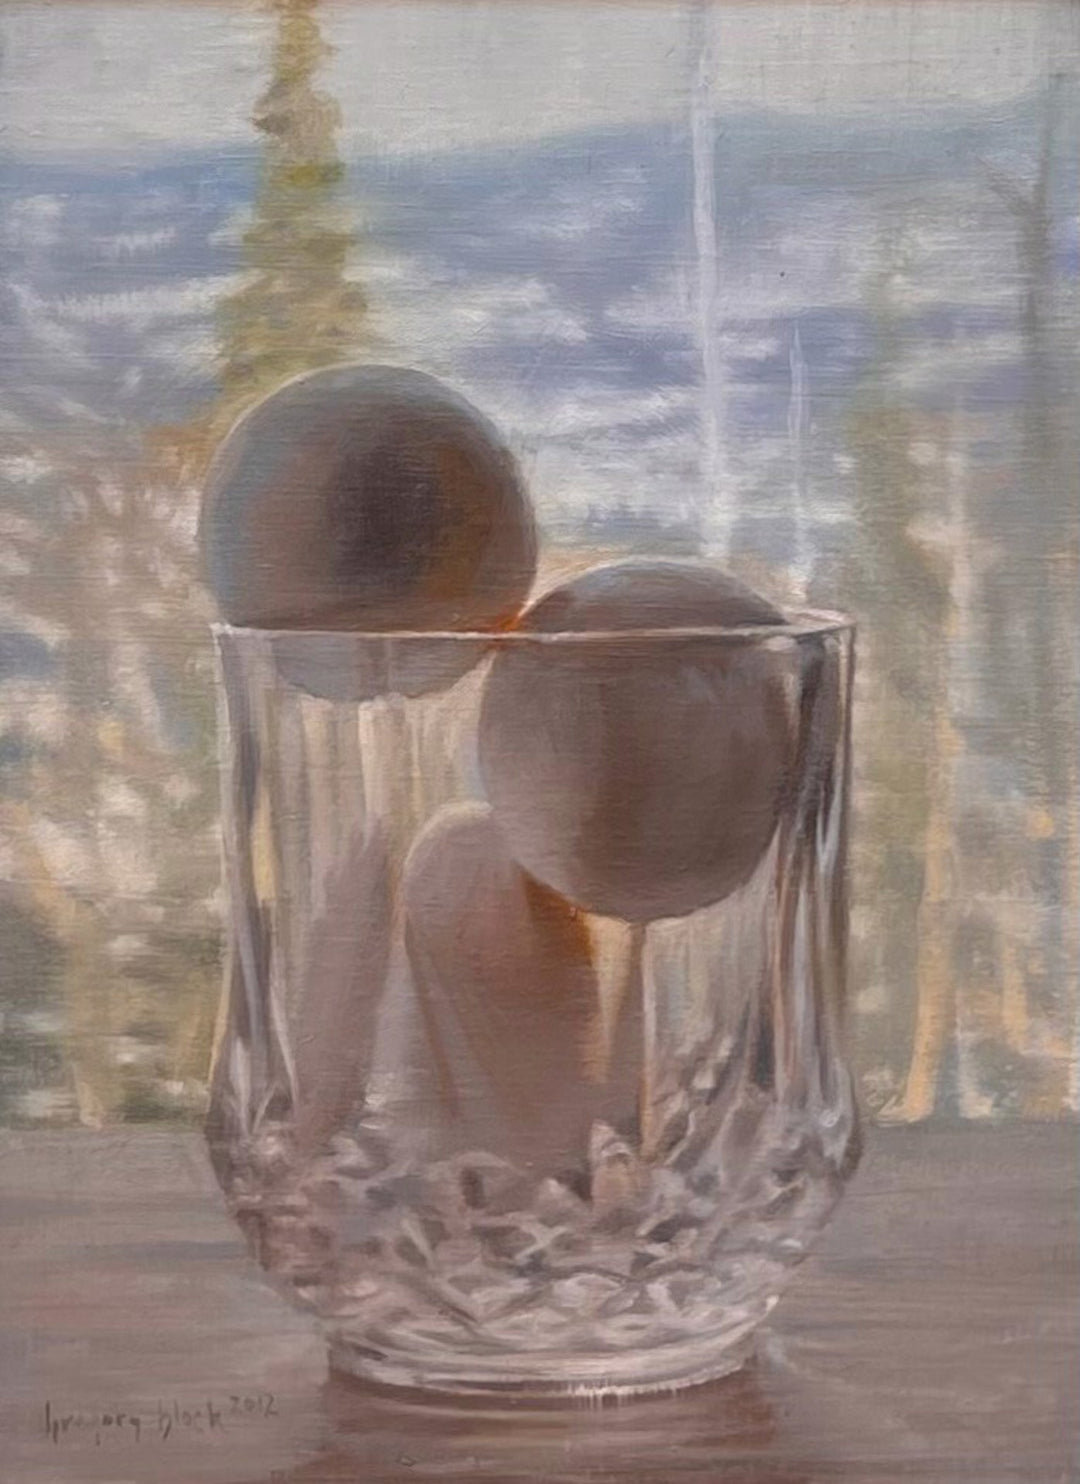 Gregory Block's stunning oil on board, "Eggs in Winter, 2013" by Gregory Block, captures the essence of winter with a mesmerizing portrayal of two eggs nestled inside a glass bowl.